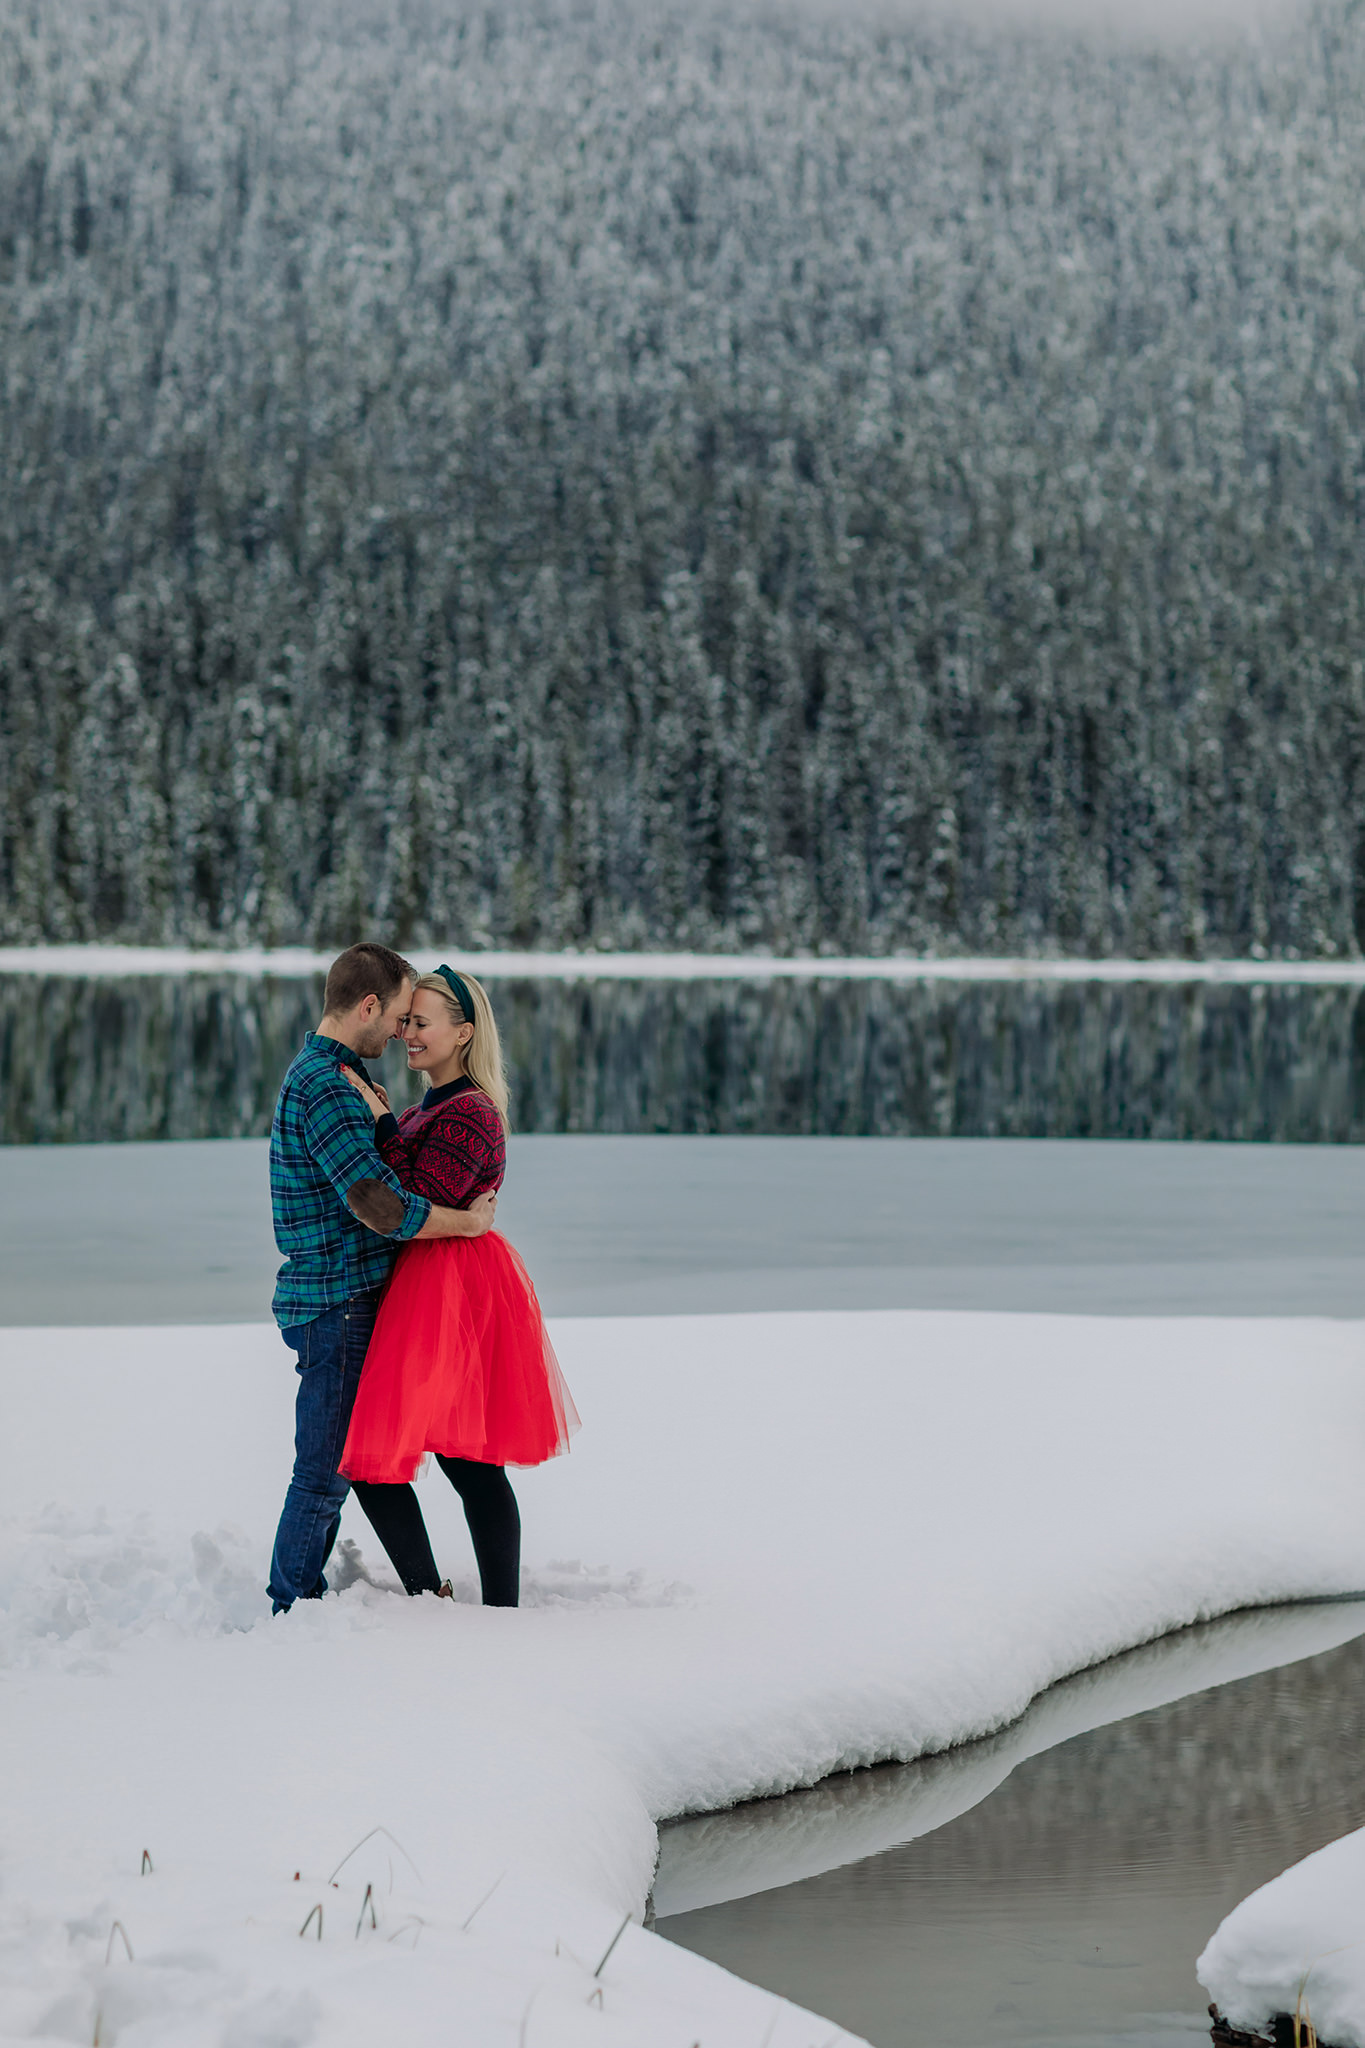 emerald lake winter engagement photos with freshly frozen lake featuring playful red tulle skirt & nordic sweater